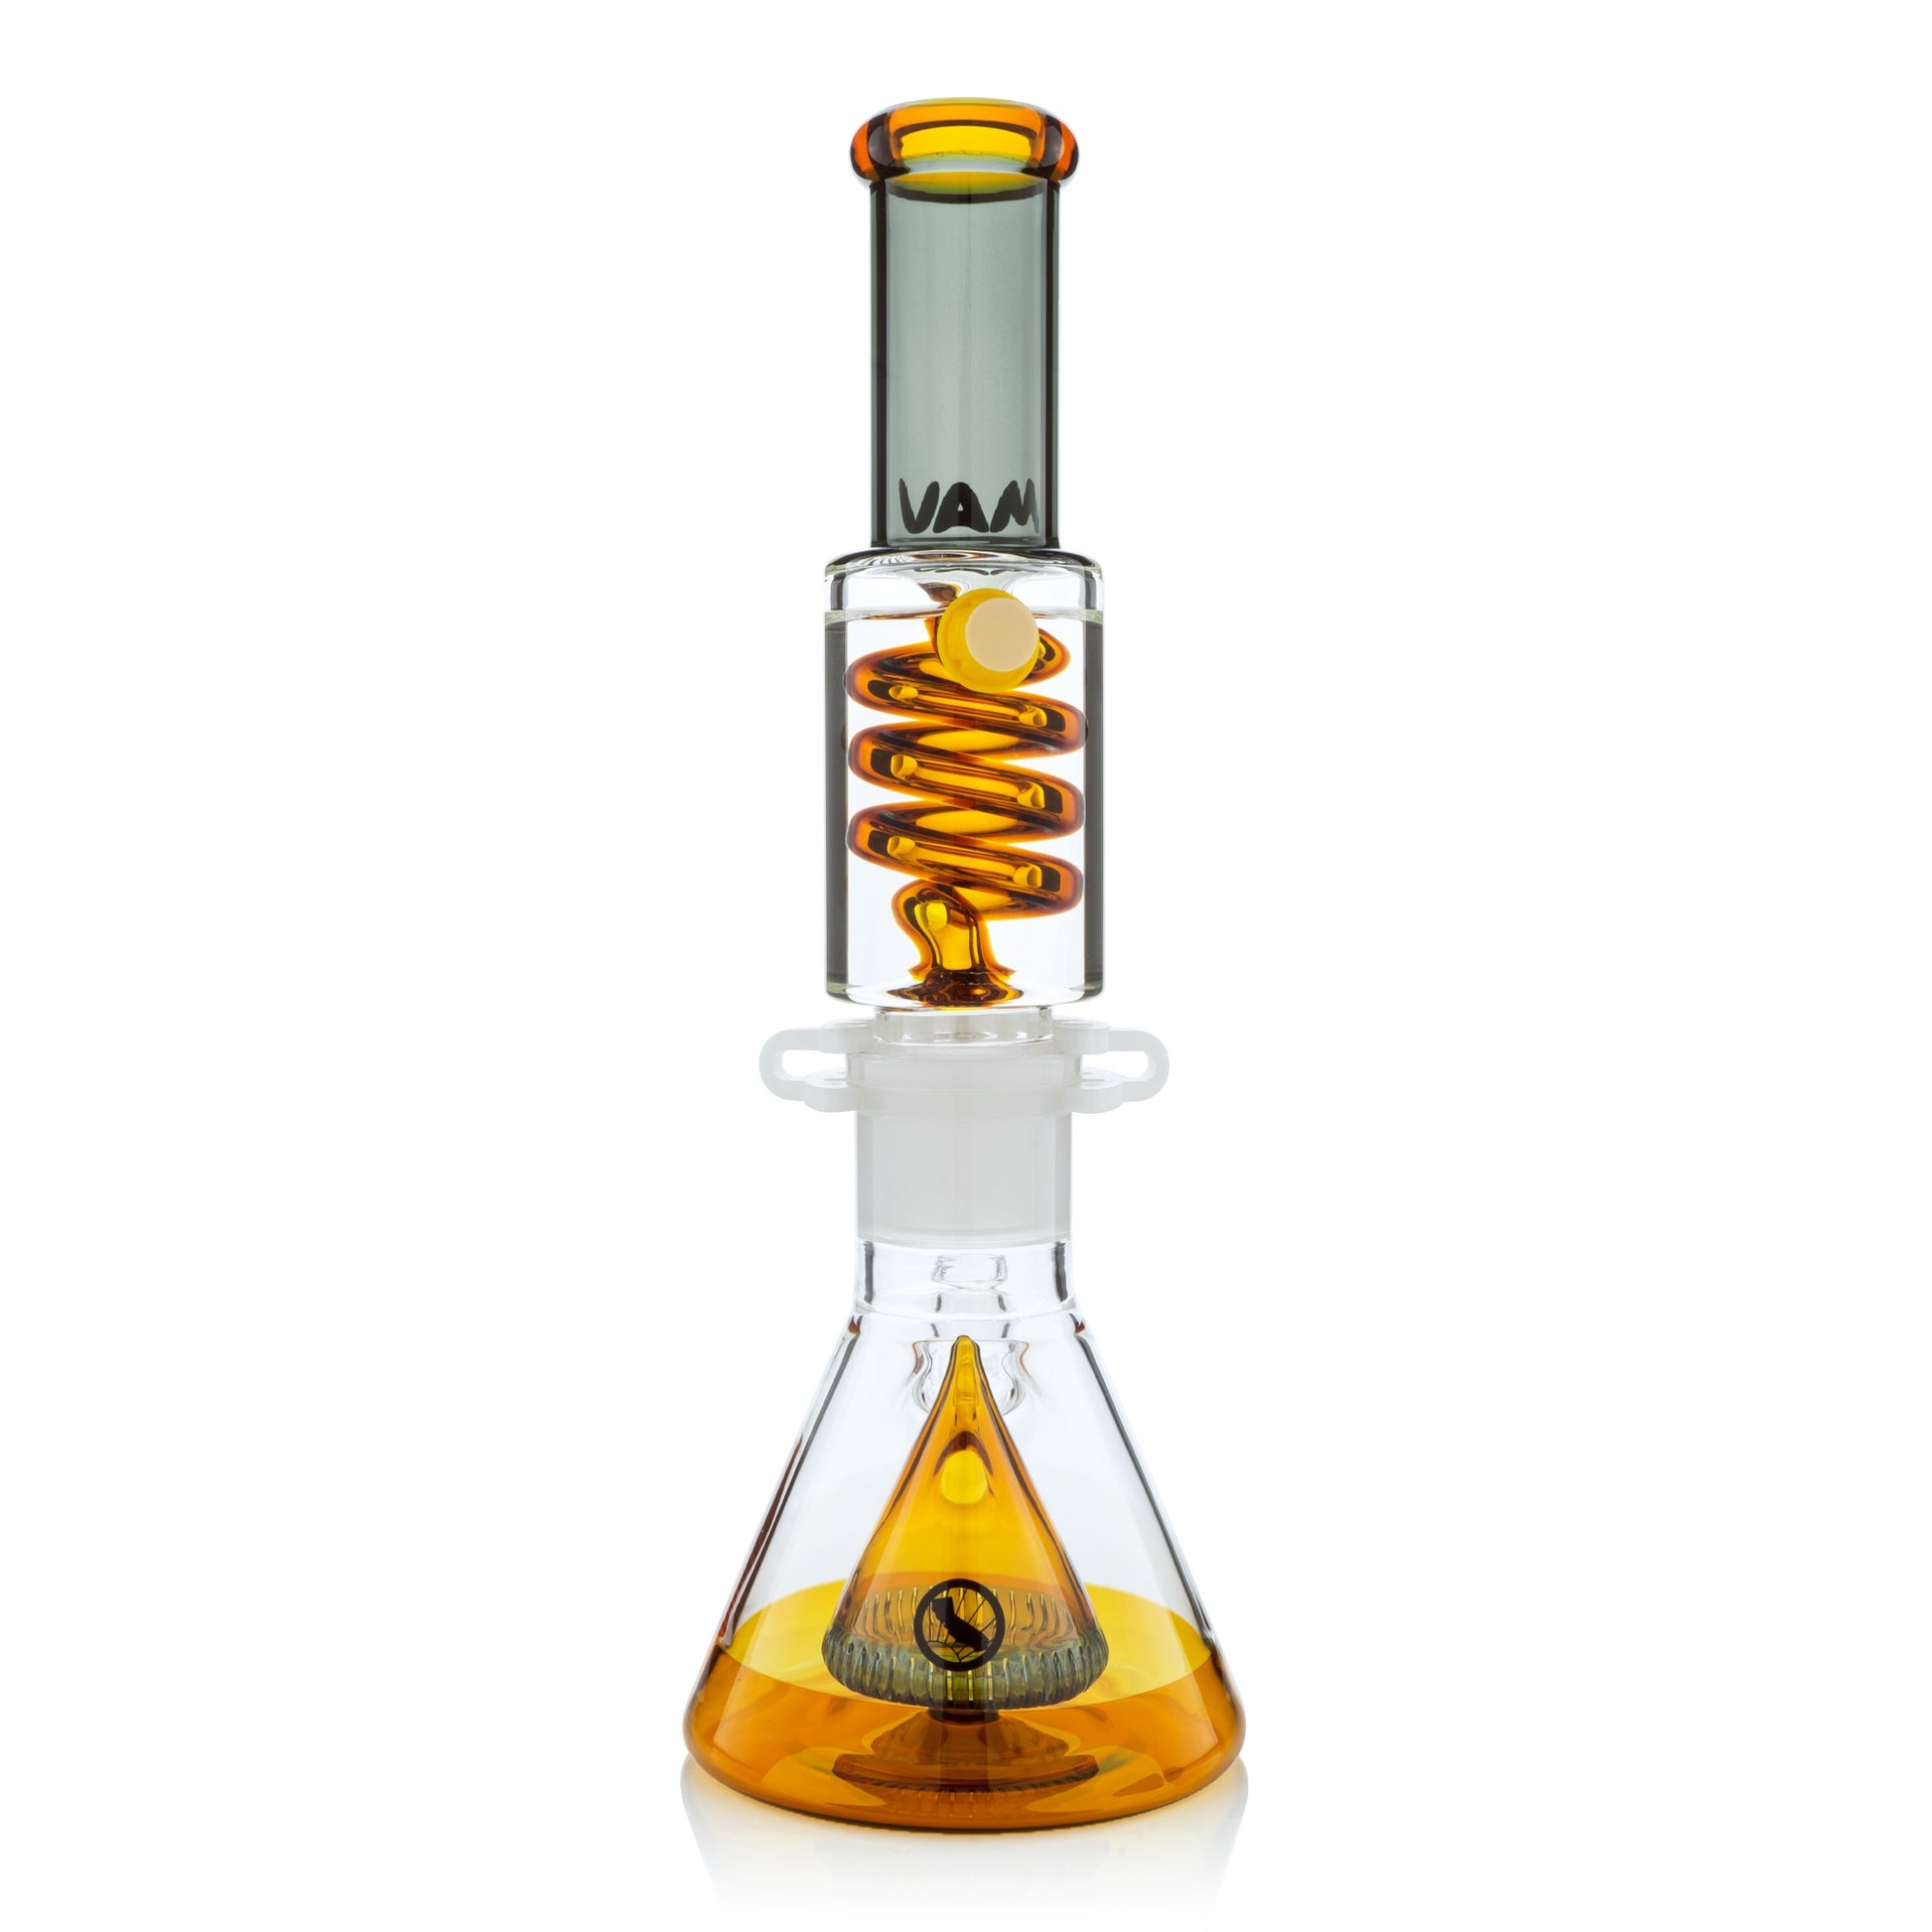 Gold and Transparent Black Slitted Pyramid Beaker Freezable Coil System